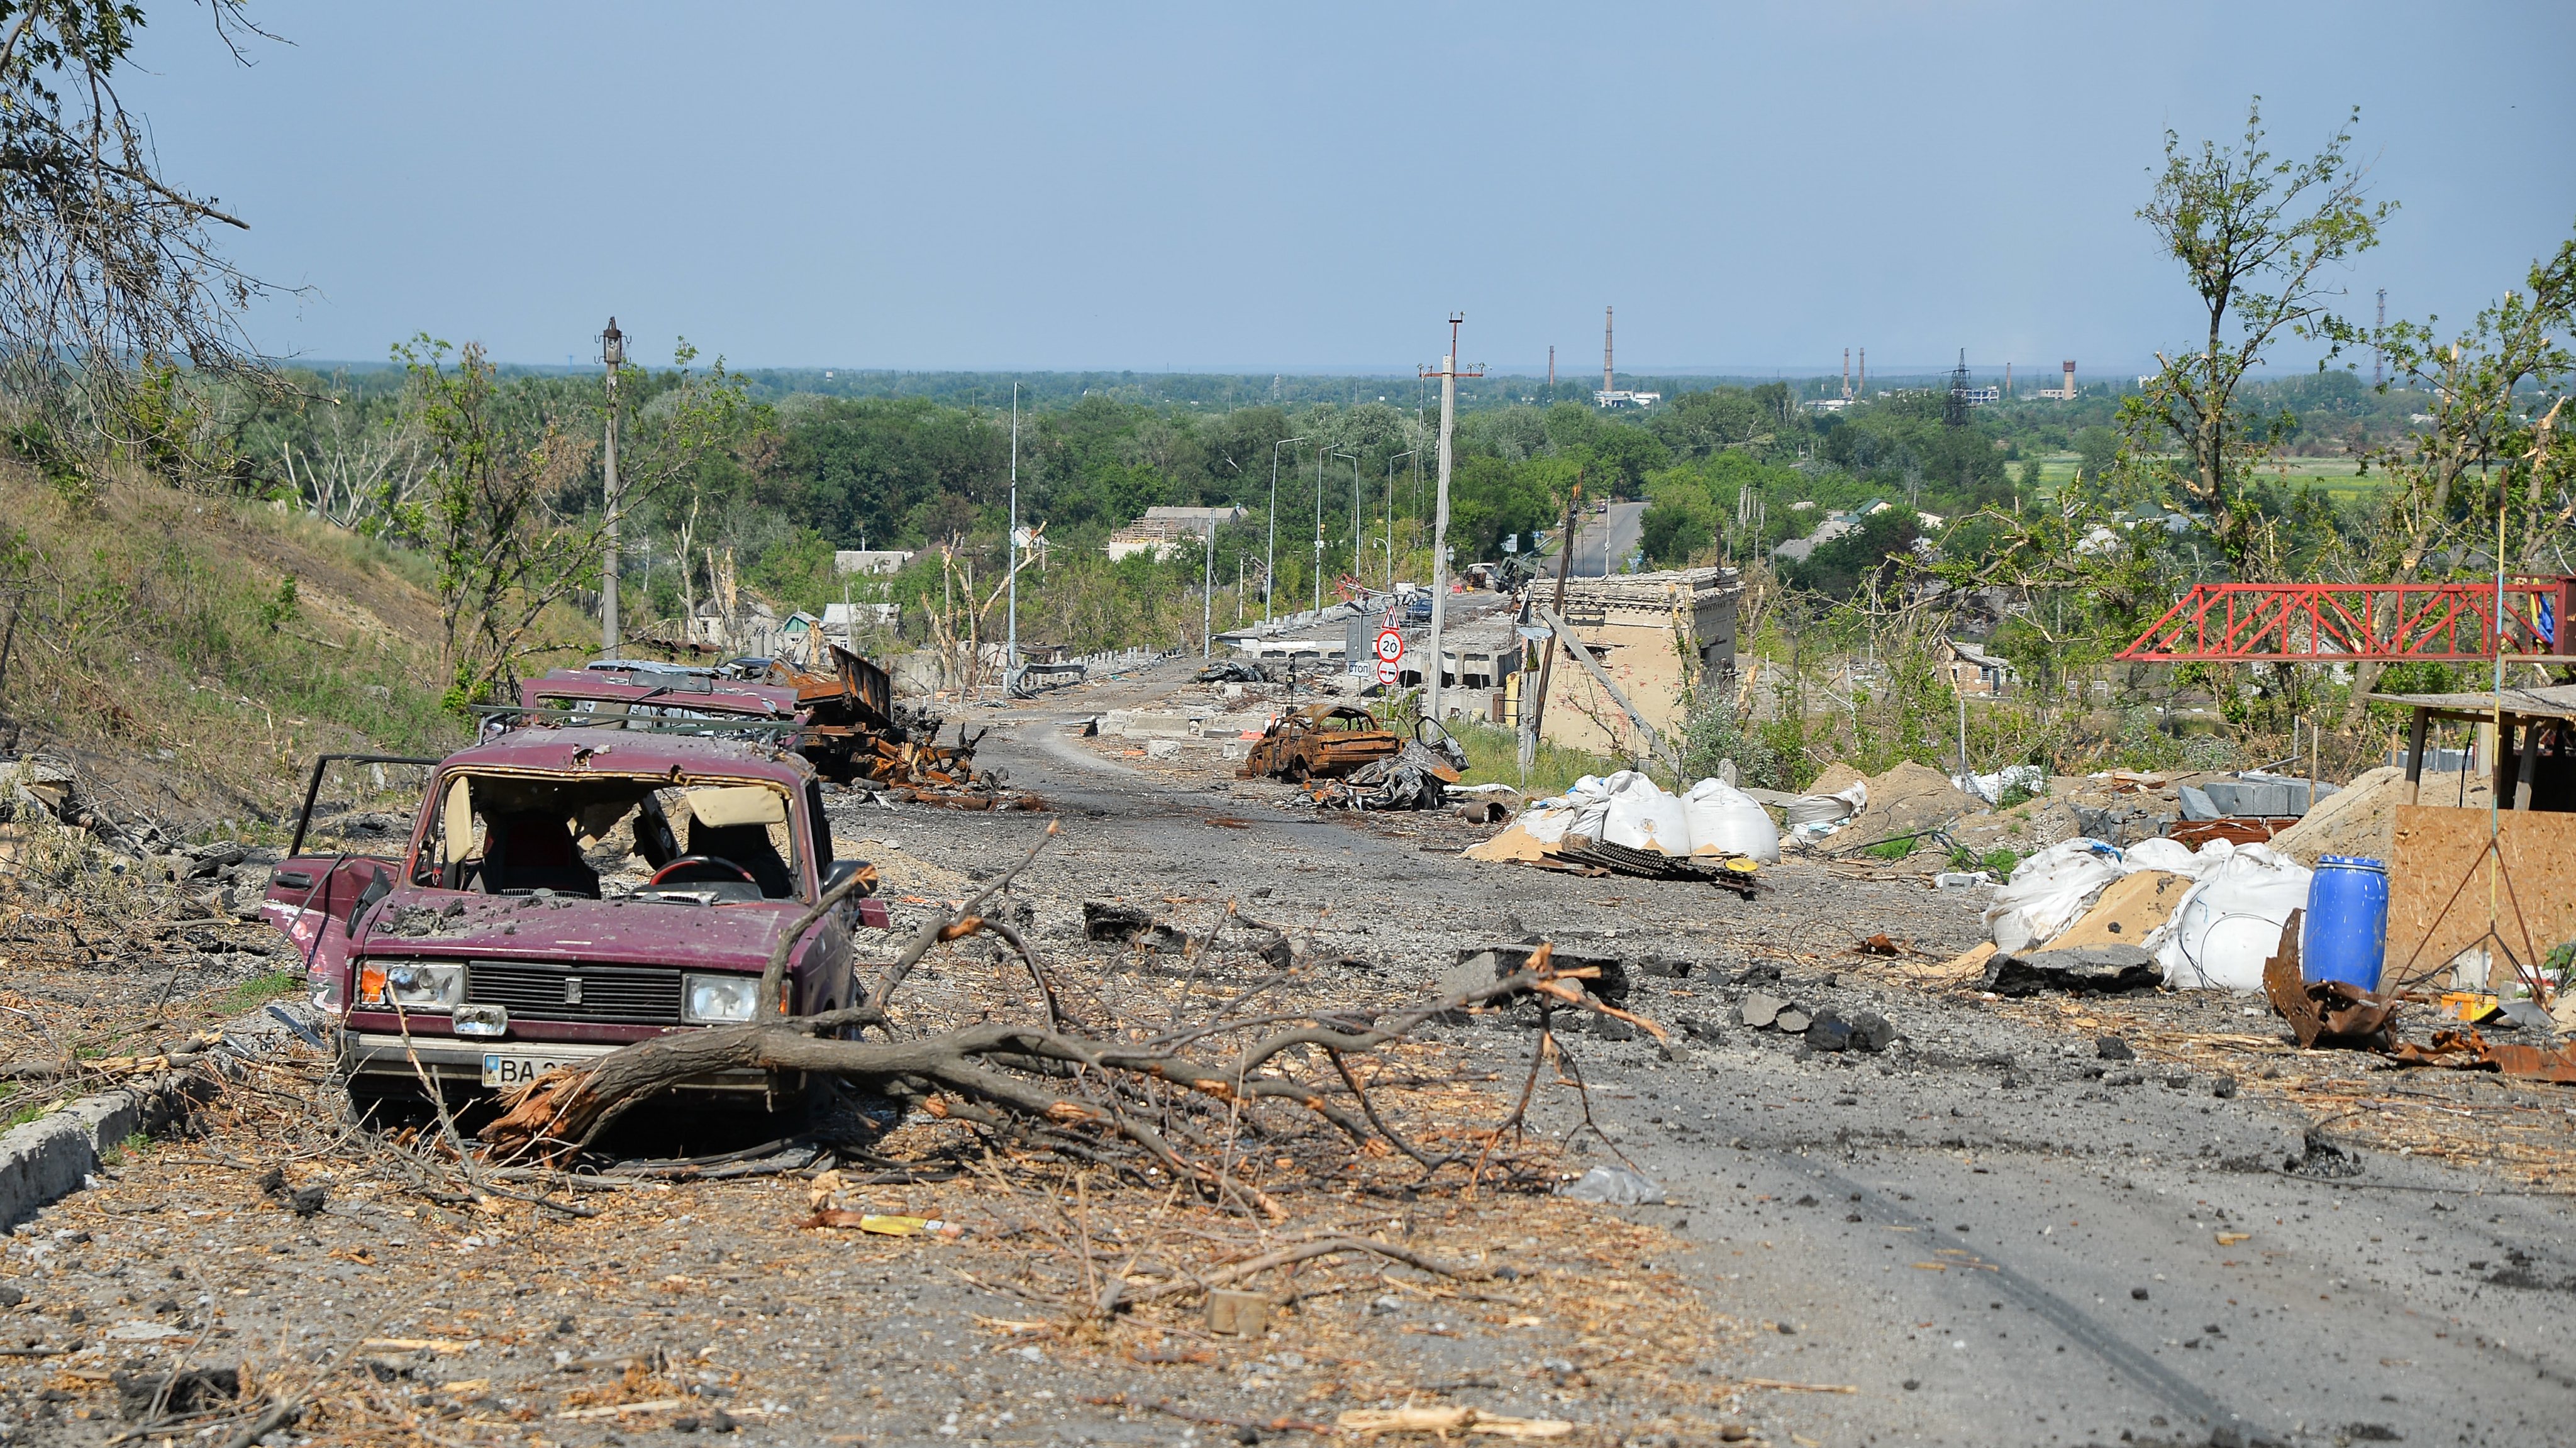 Debris and destroyed cars are seen along the street in